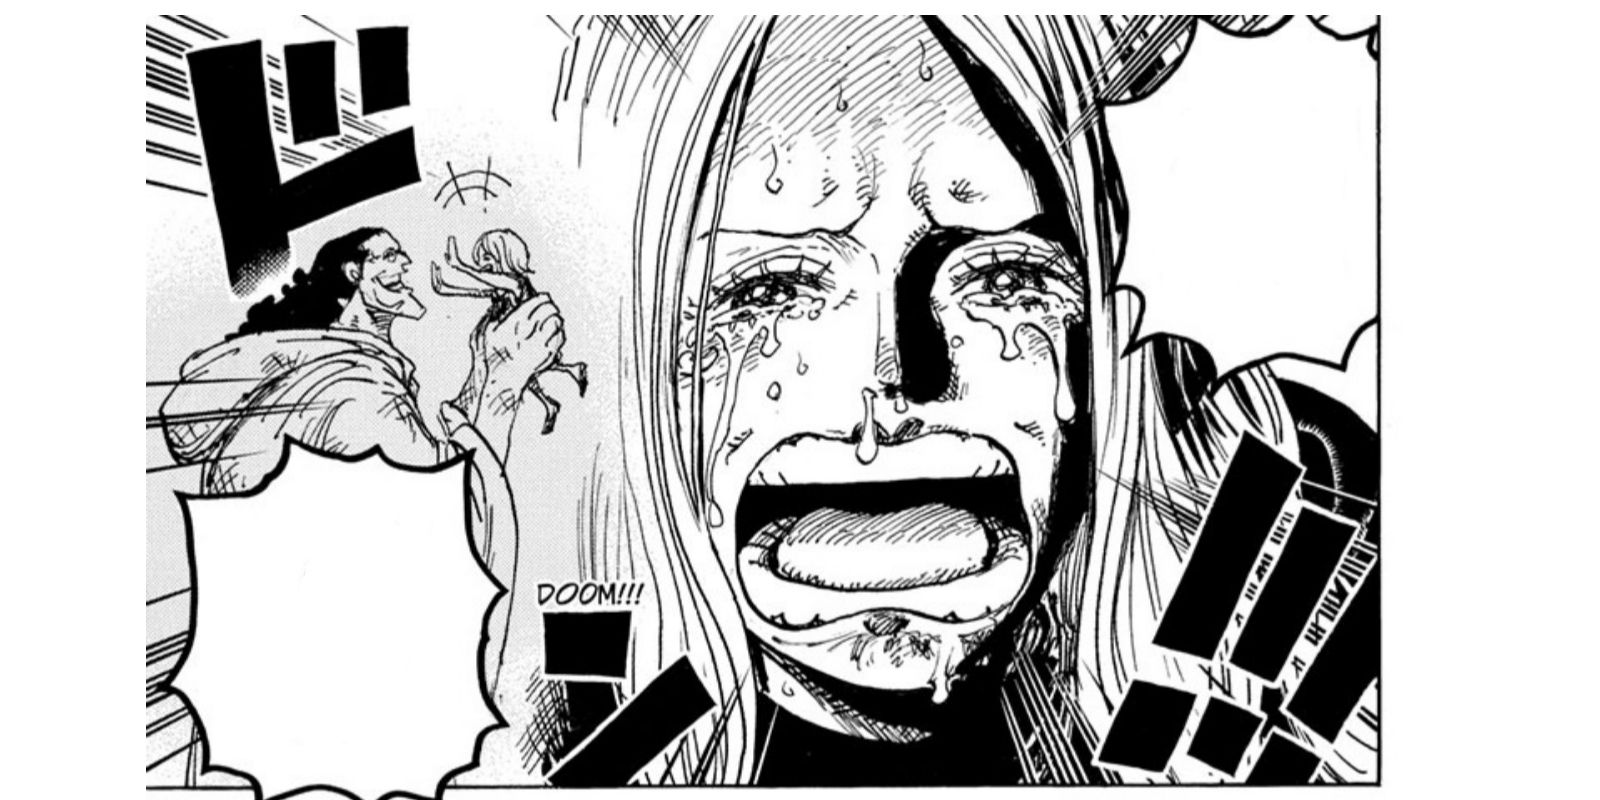 Bonney crying in One Piece